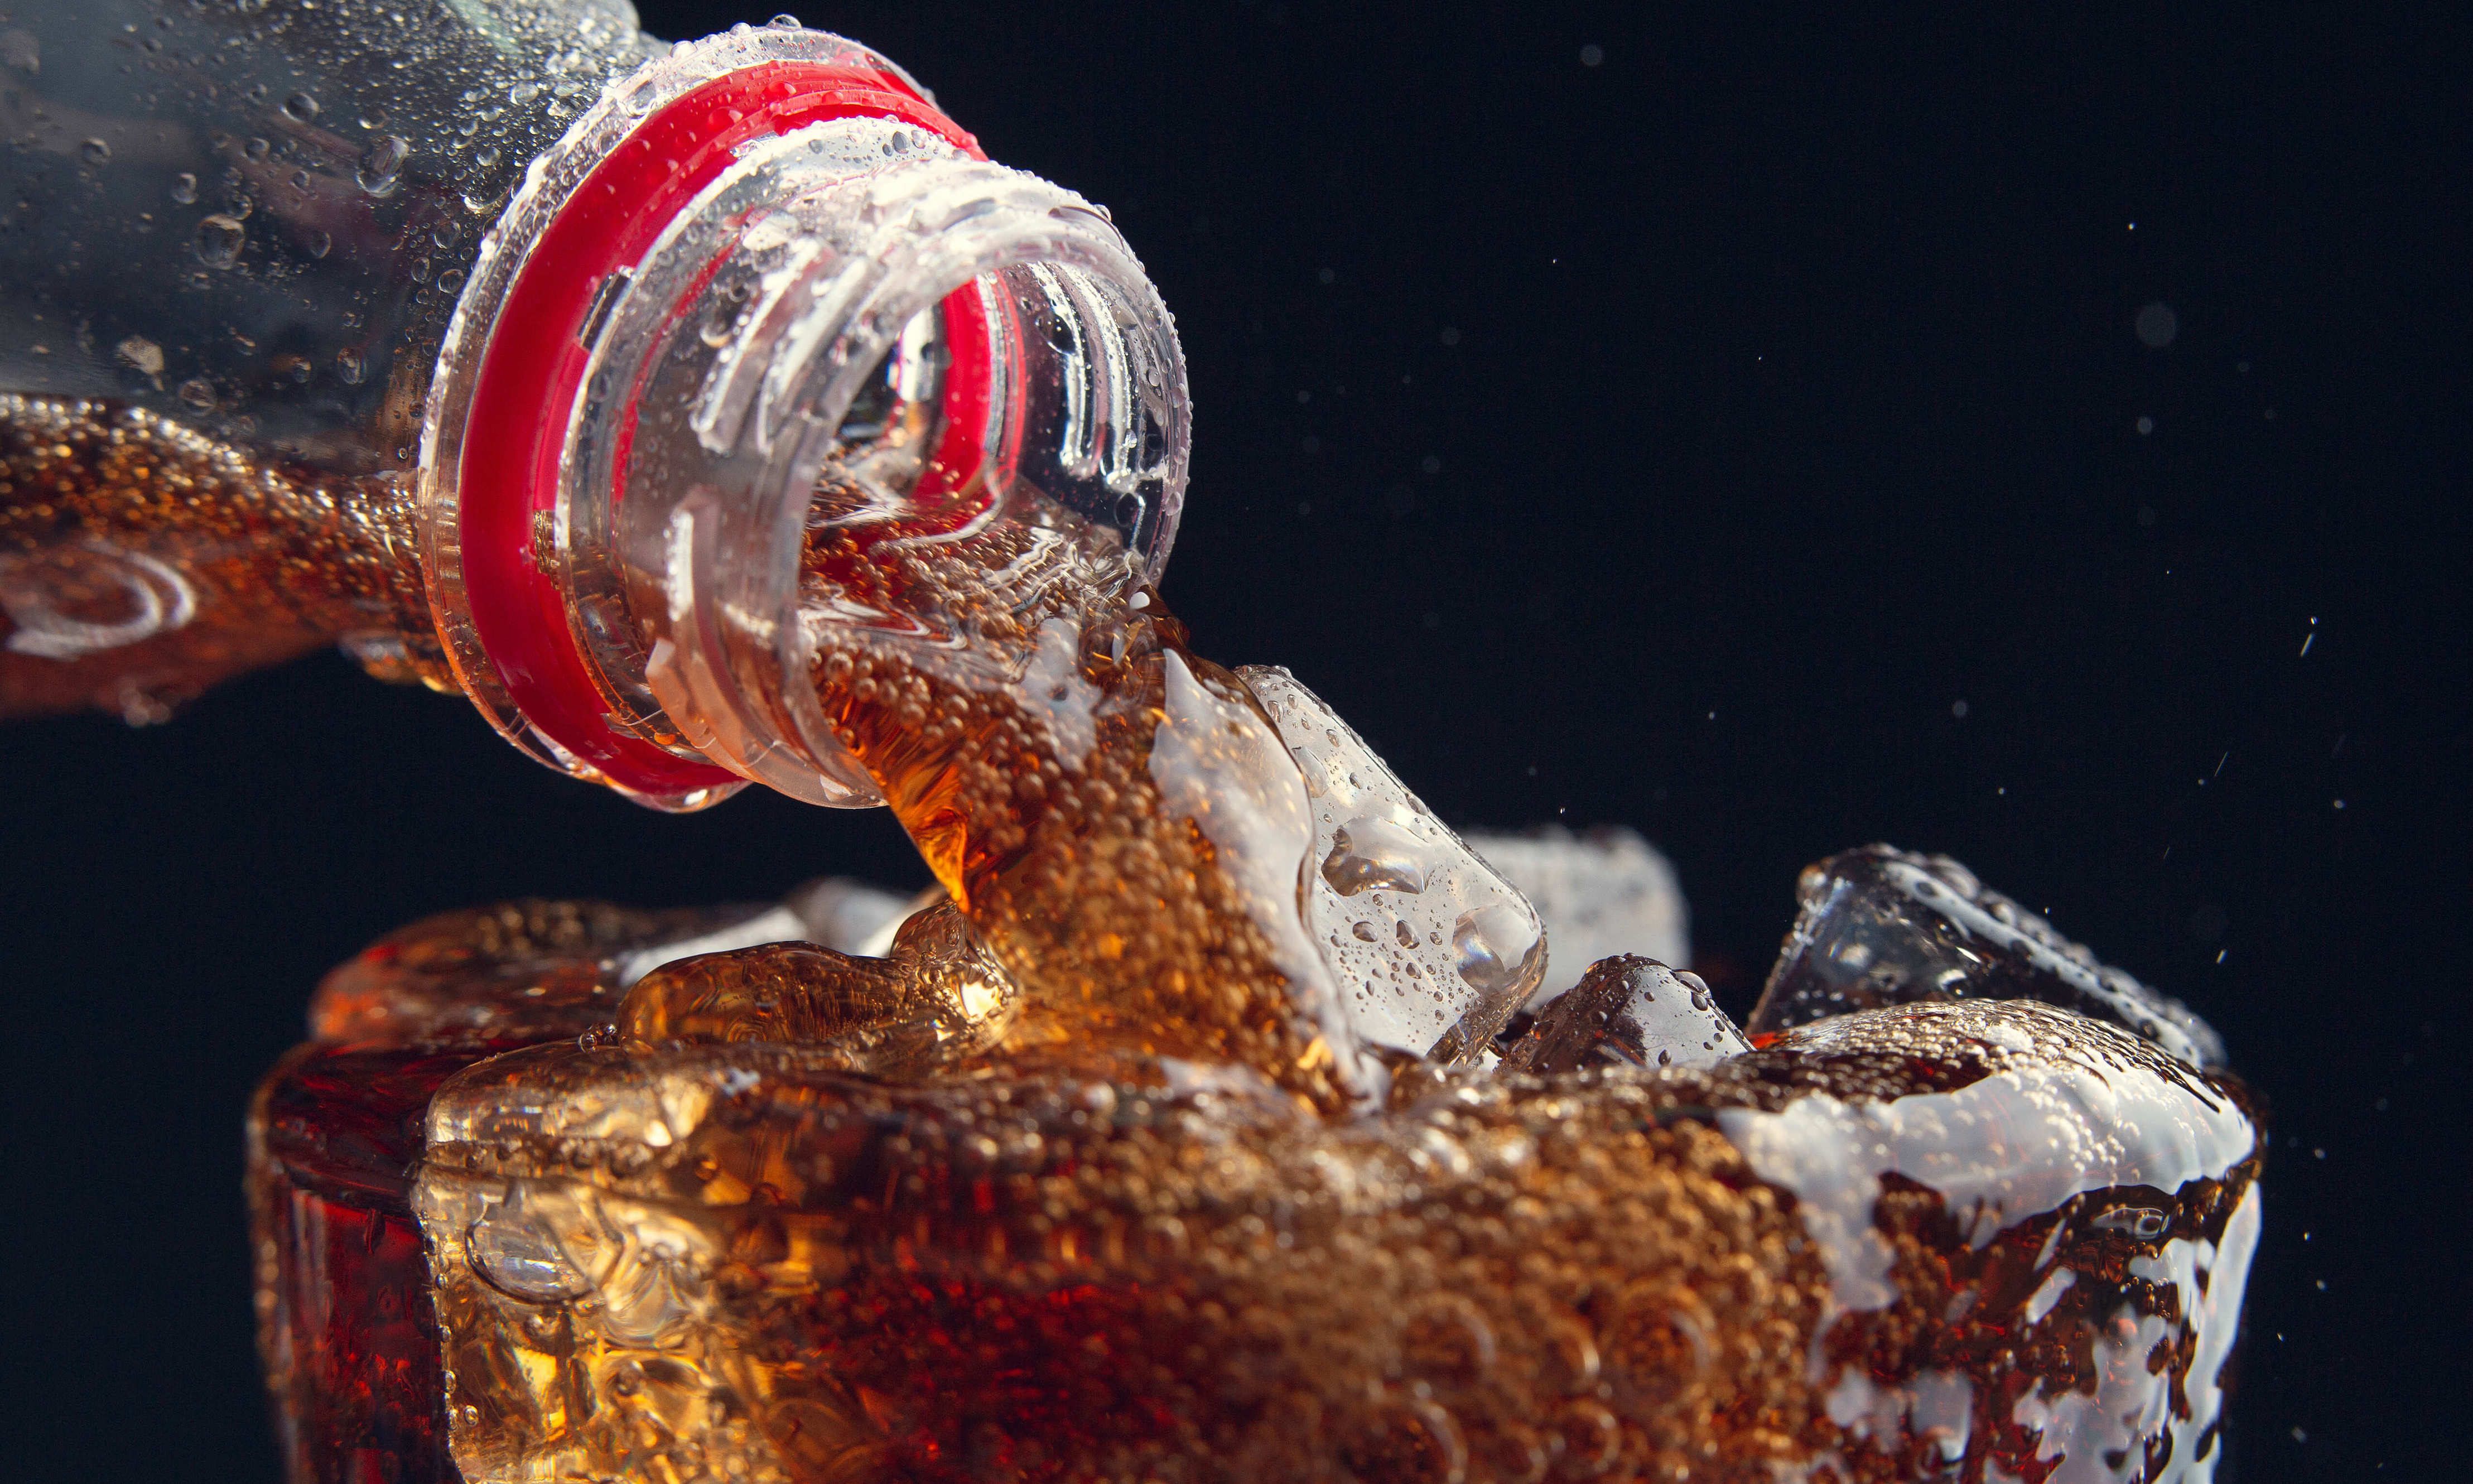 is drinking sugary drinks dangerous?